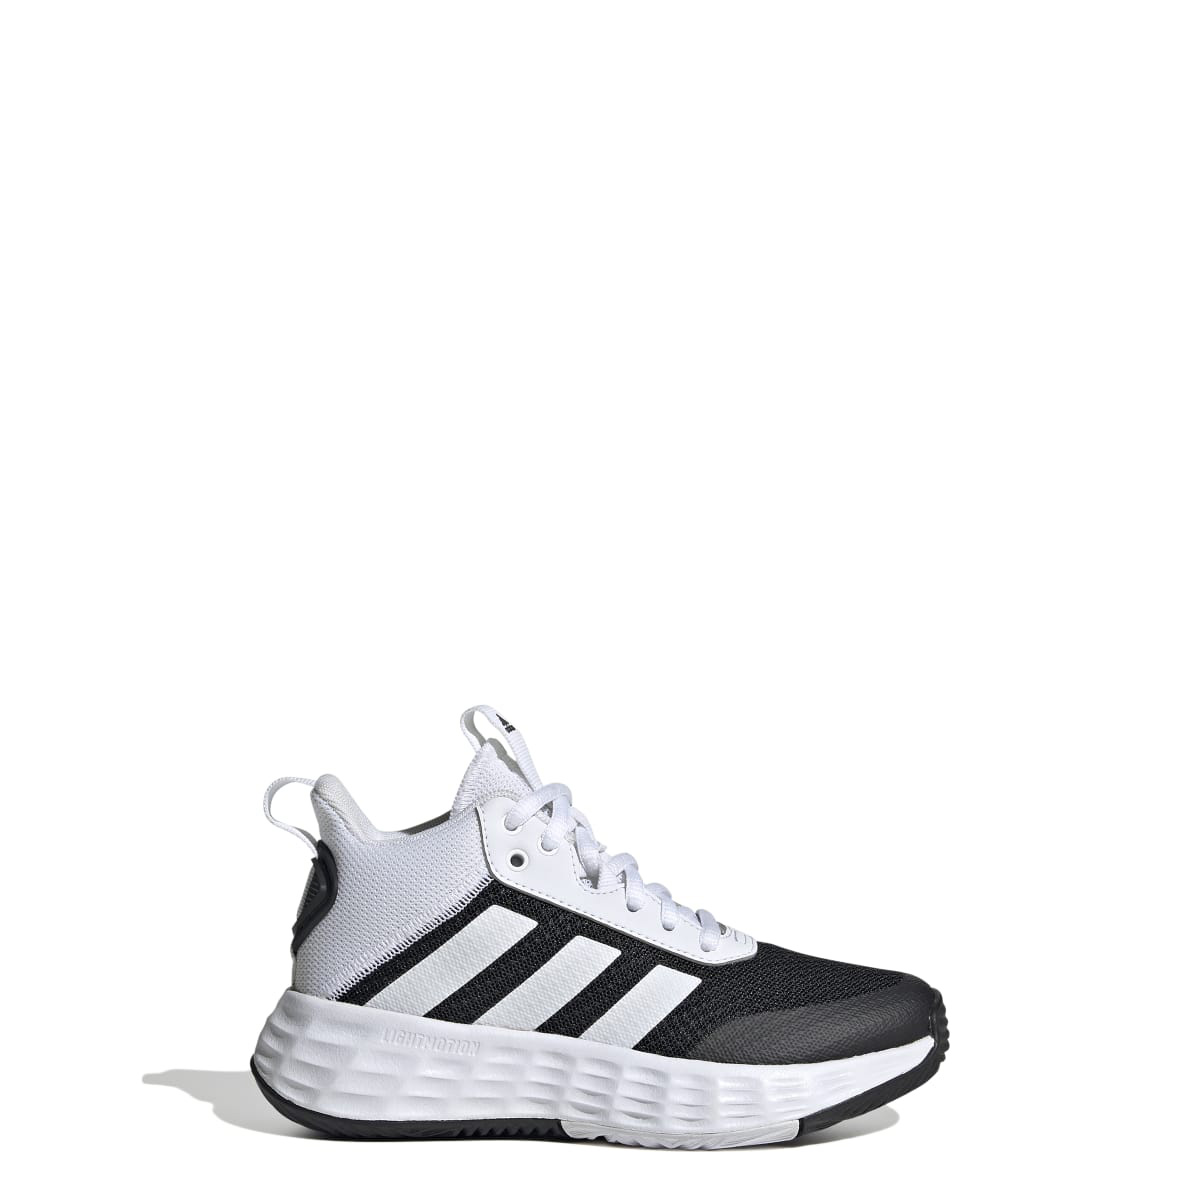 adidas Youth Grade School 2.0 Basketball Ownthegame Shoes